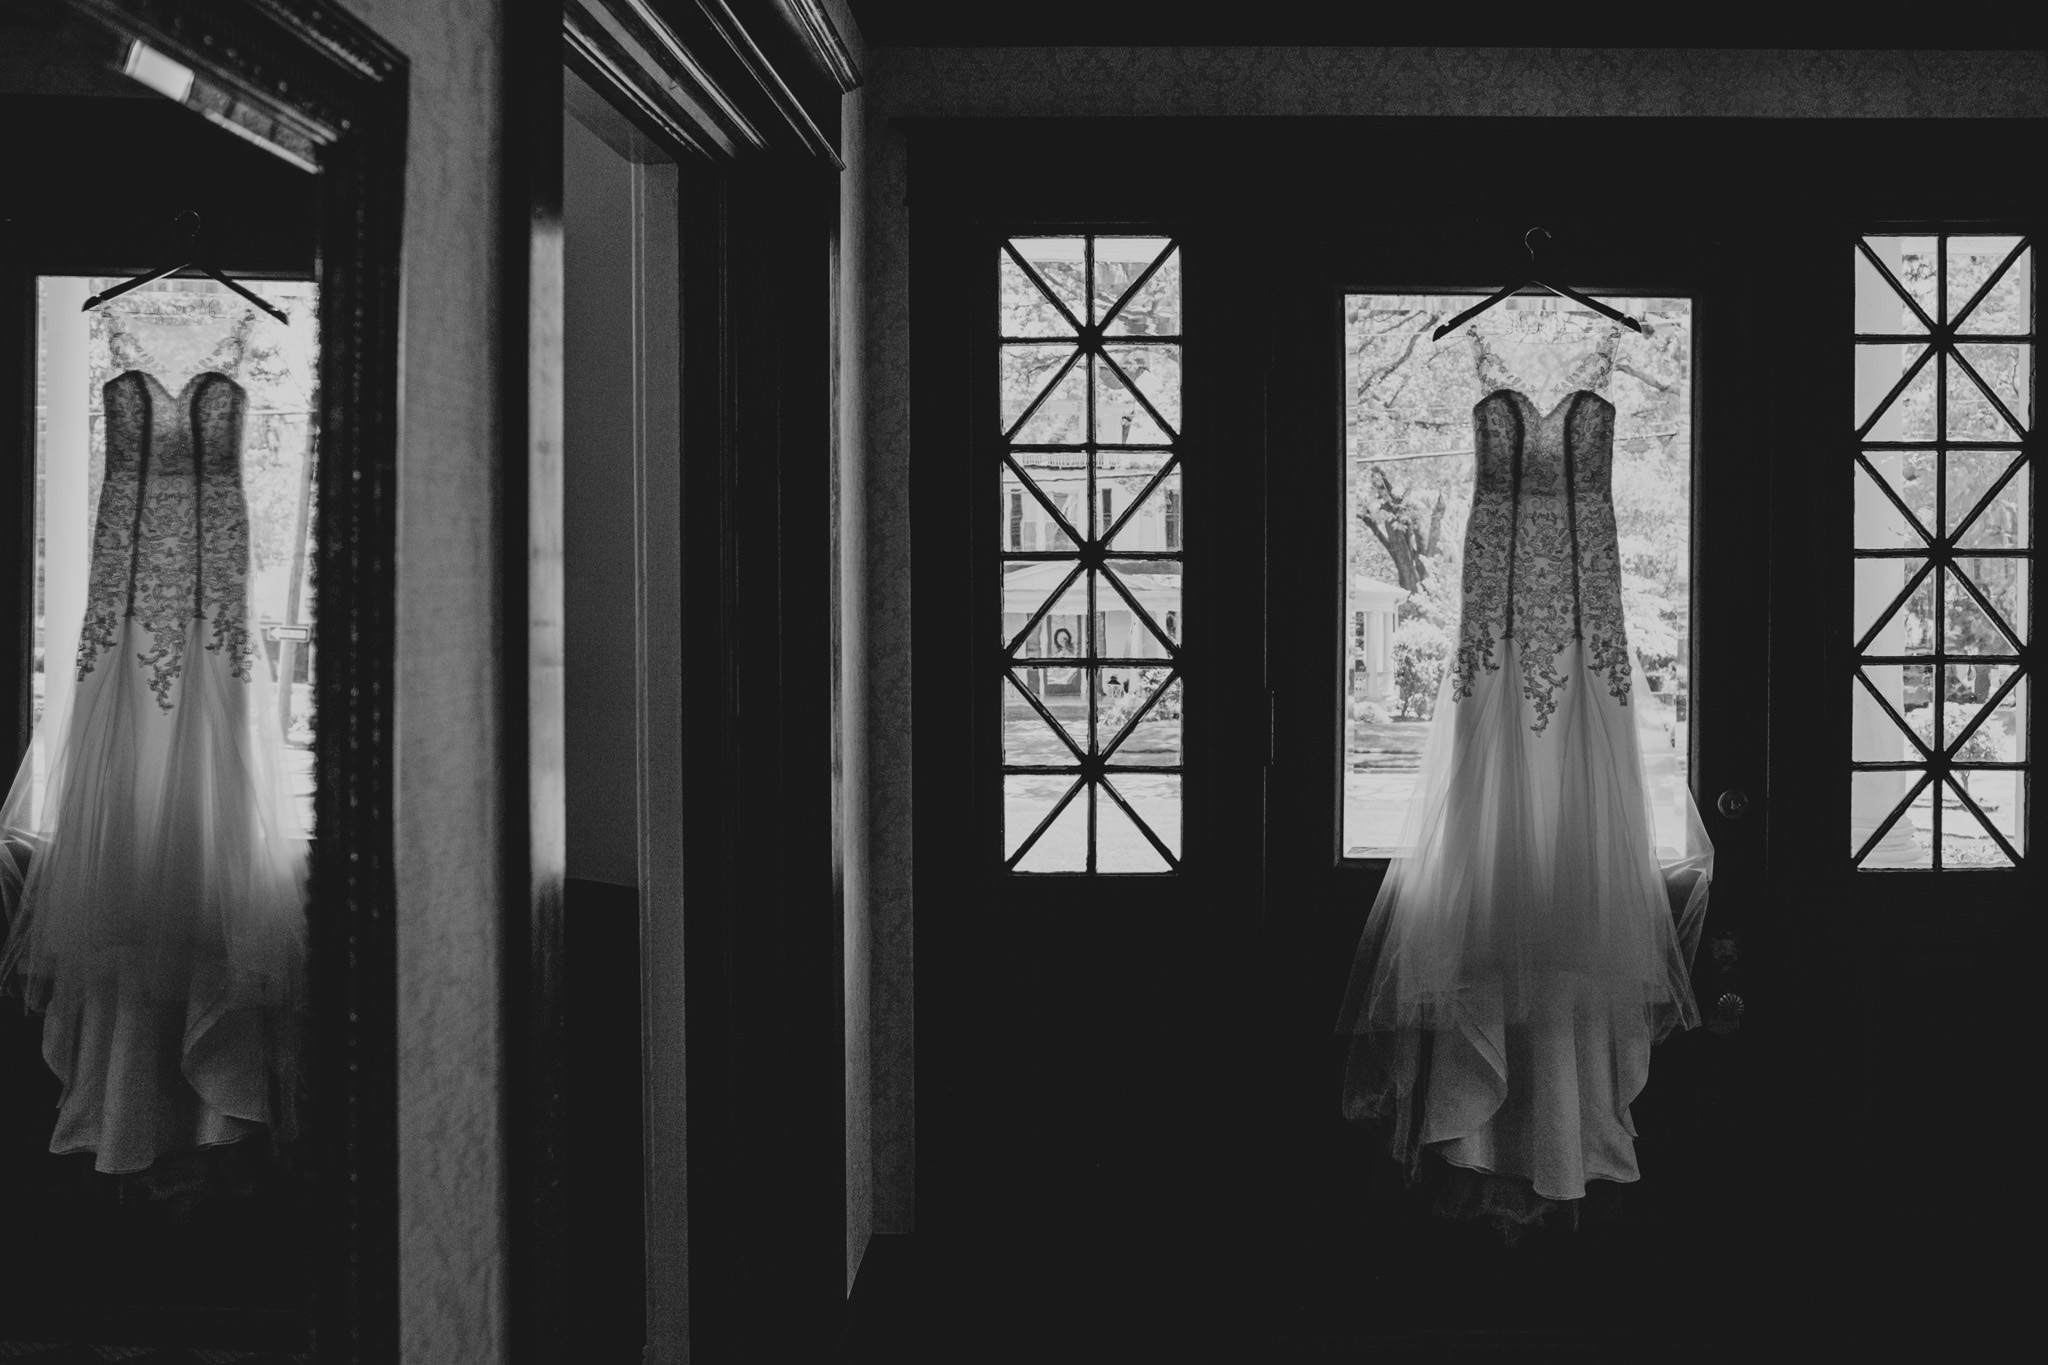 The wedding gown reflected in a mirror at the Shuford House in Hickory, NC